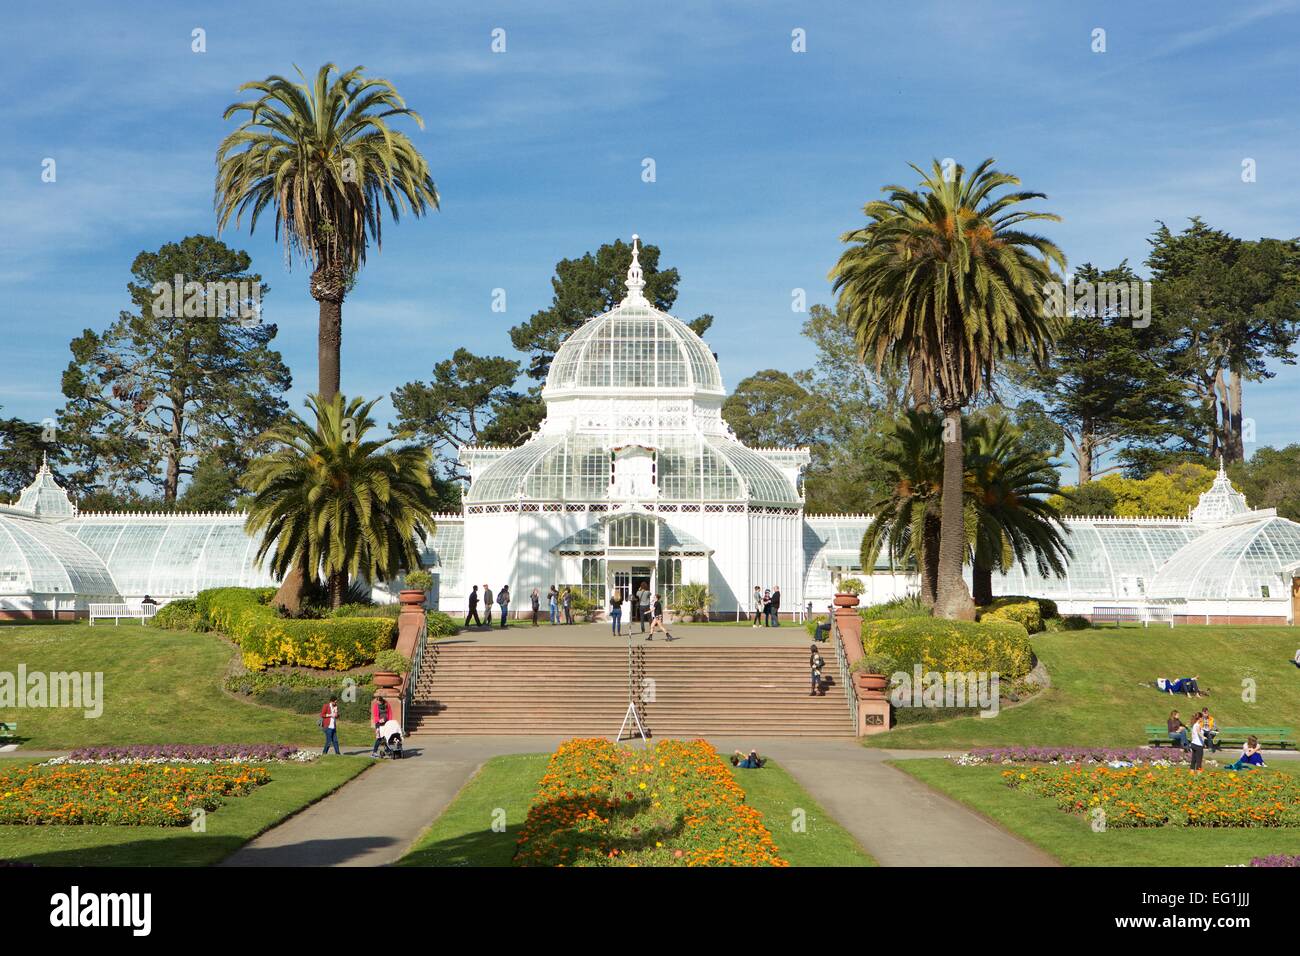 The Victorian Conservatory Of Flowers Botanical Garden In Golden